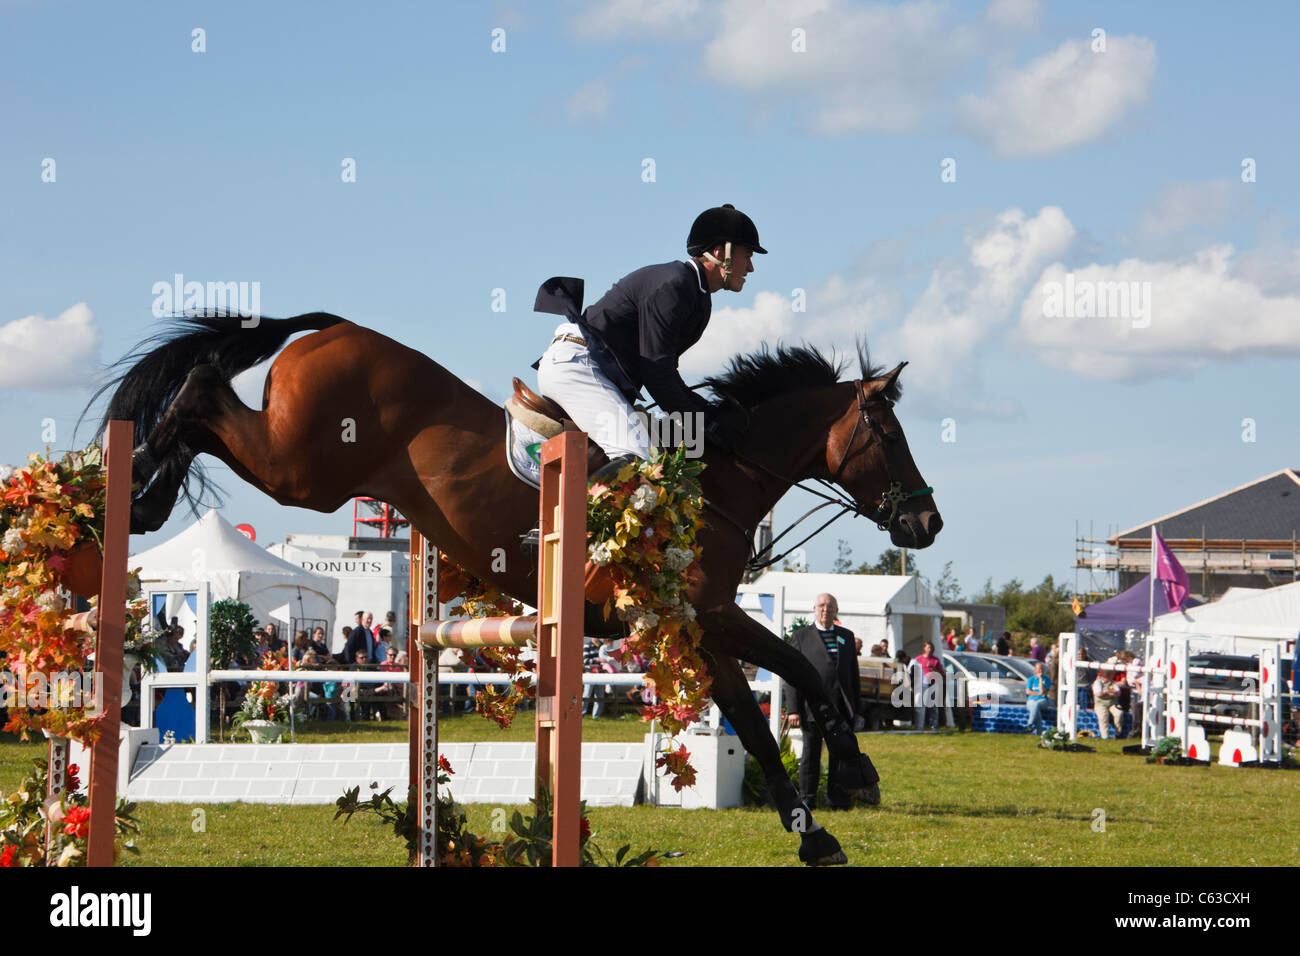 North Wales, UK. International show jumping event with horse and jockey jumping over jumps at Anglesey Show in Mona showground Stock Photo